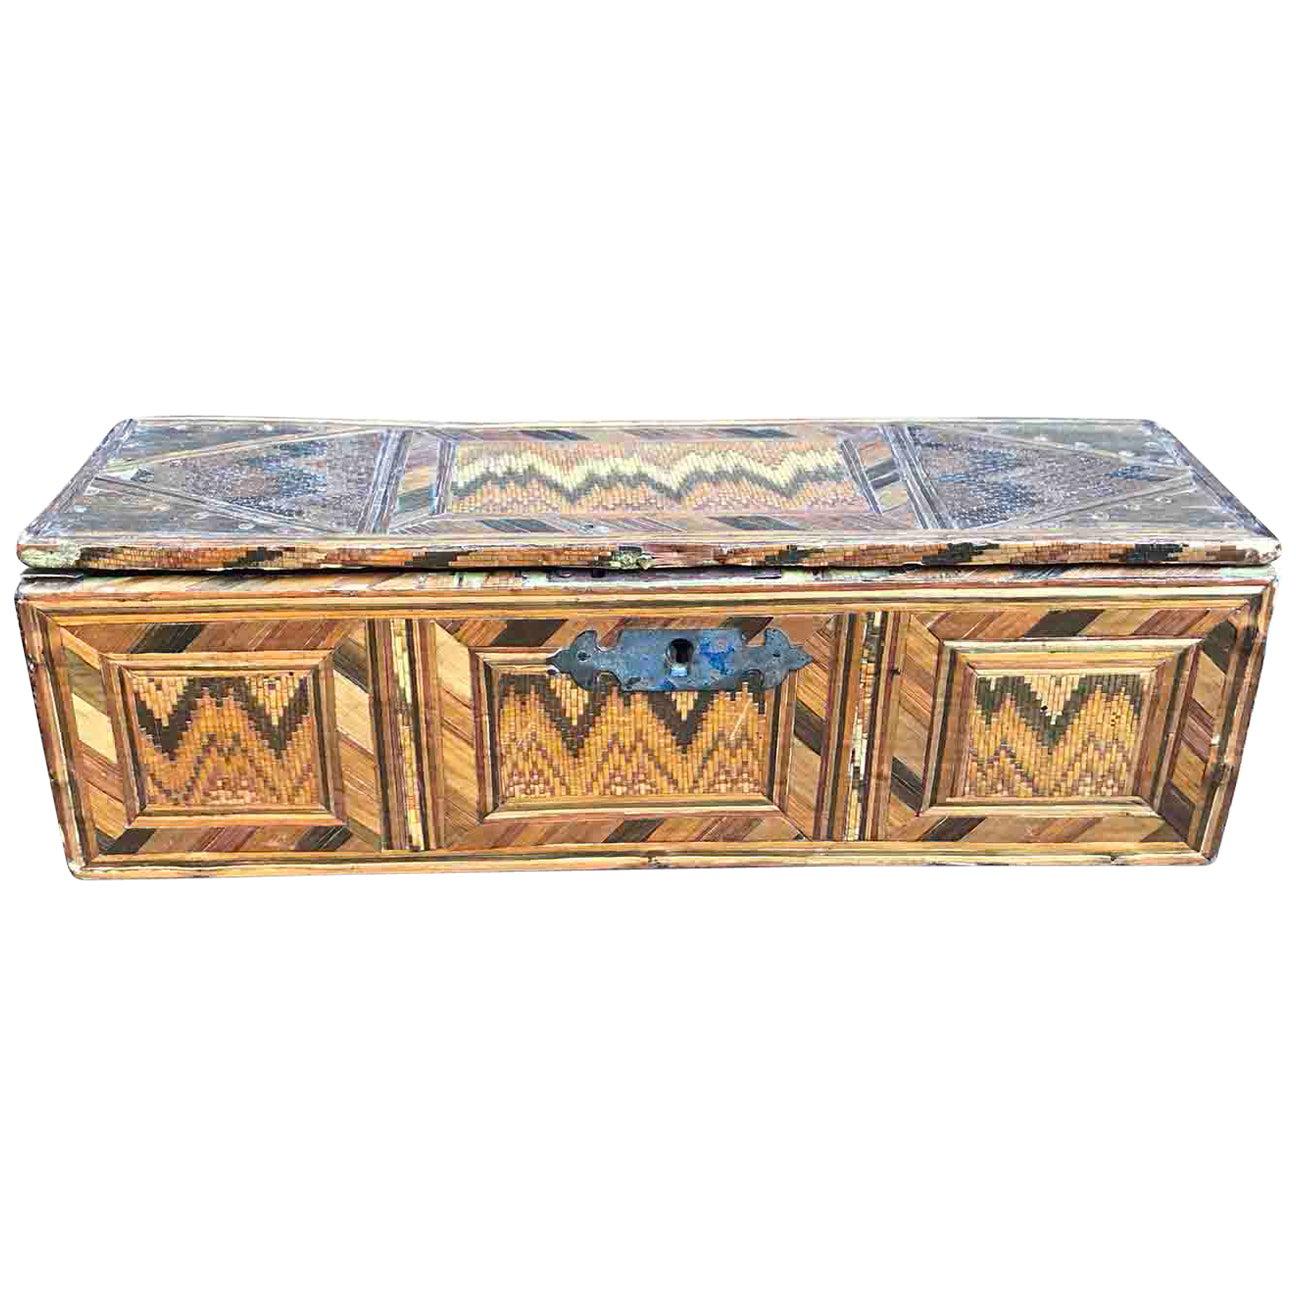 Italian 19th Century Braided Straw Box from a Monastery in Umbria Region For Sale